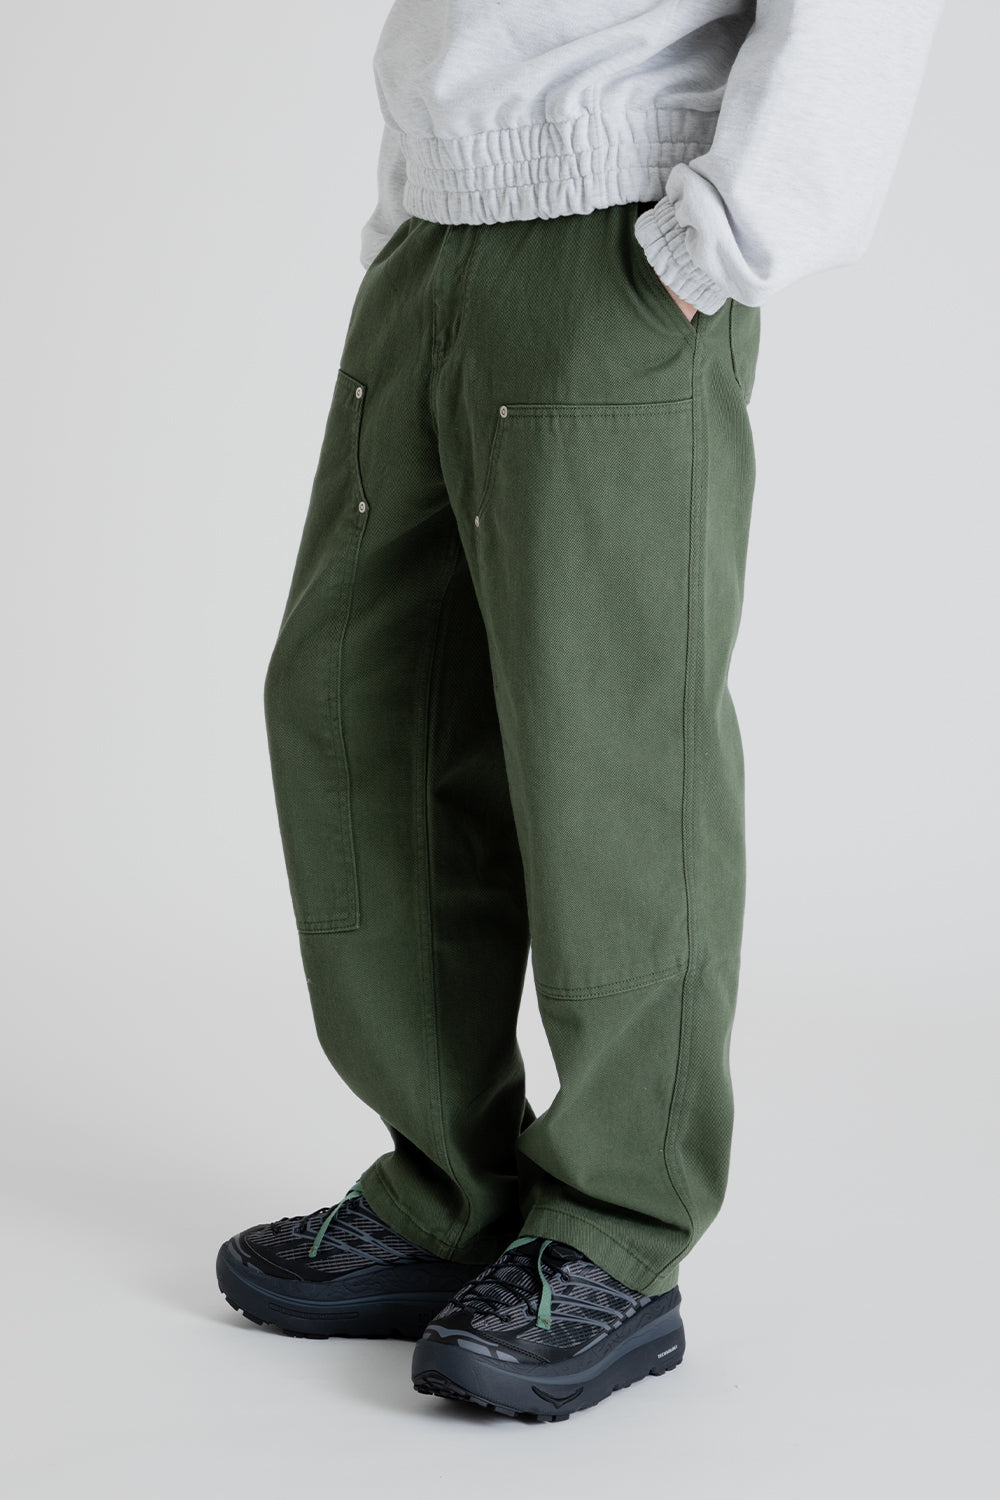 Frizmworks 7S Cotton Double Knee Pants in Olive  Wallace Mercantile S –  Wallace Mercantile Shop